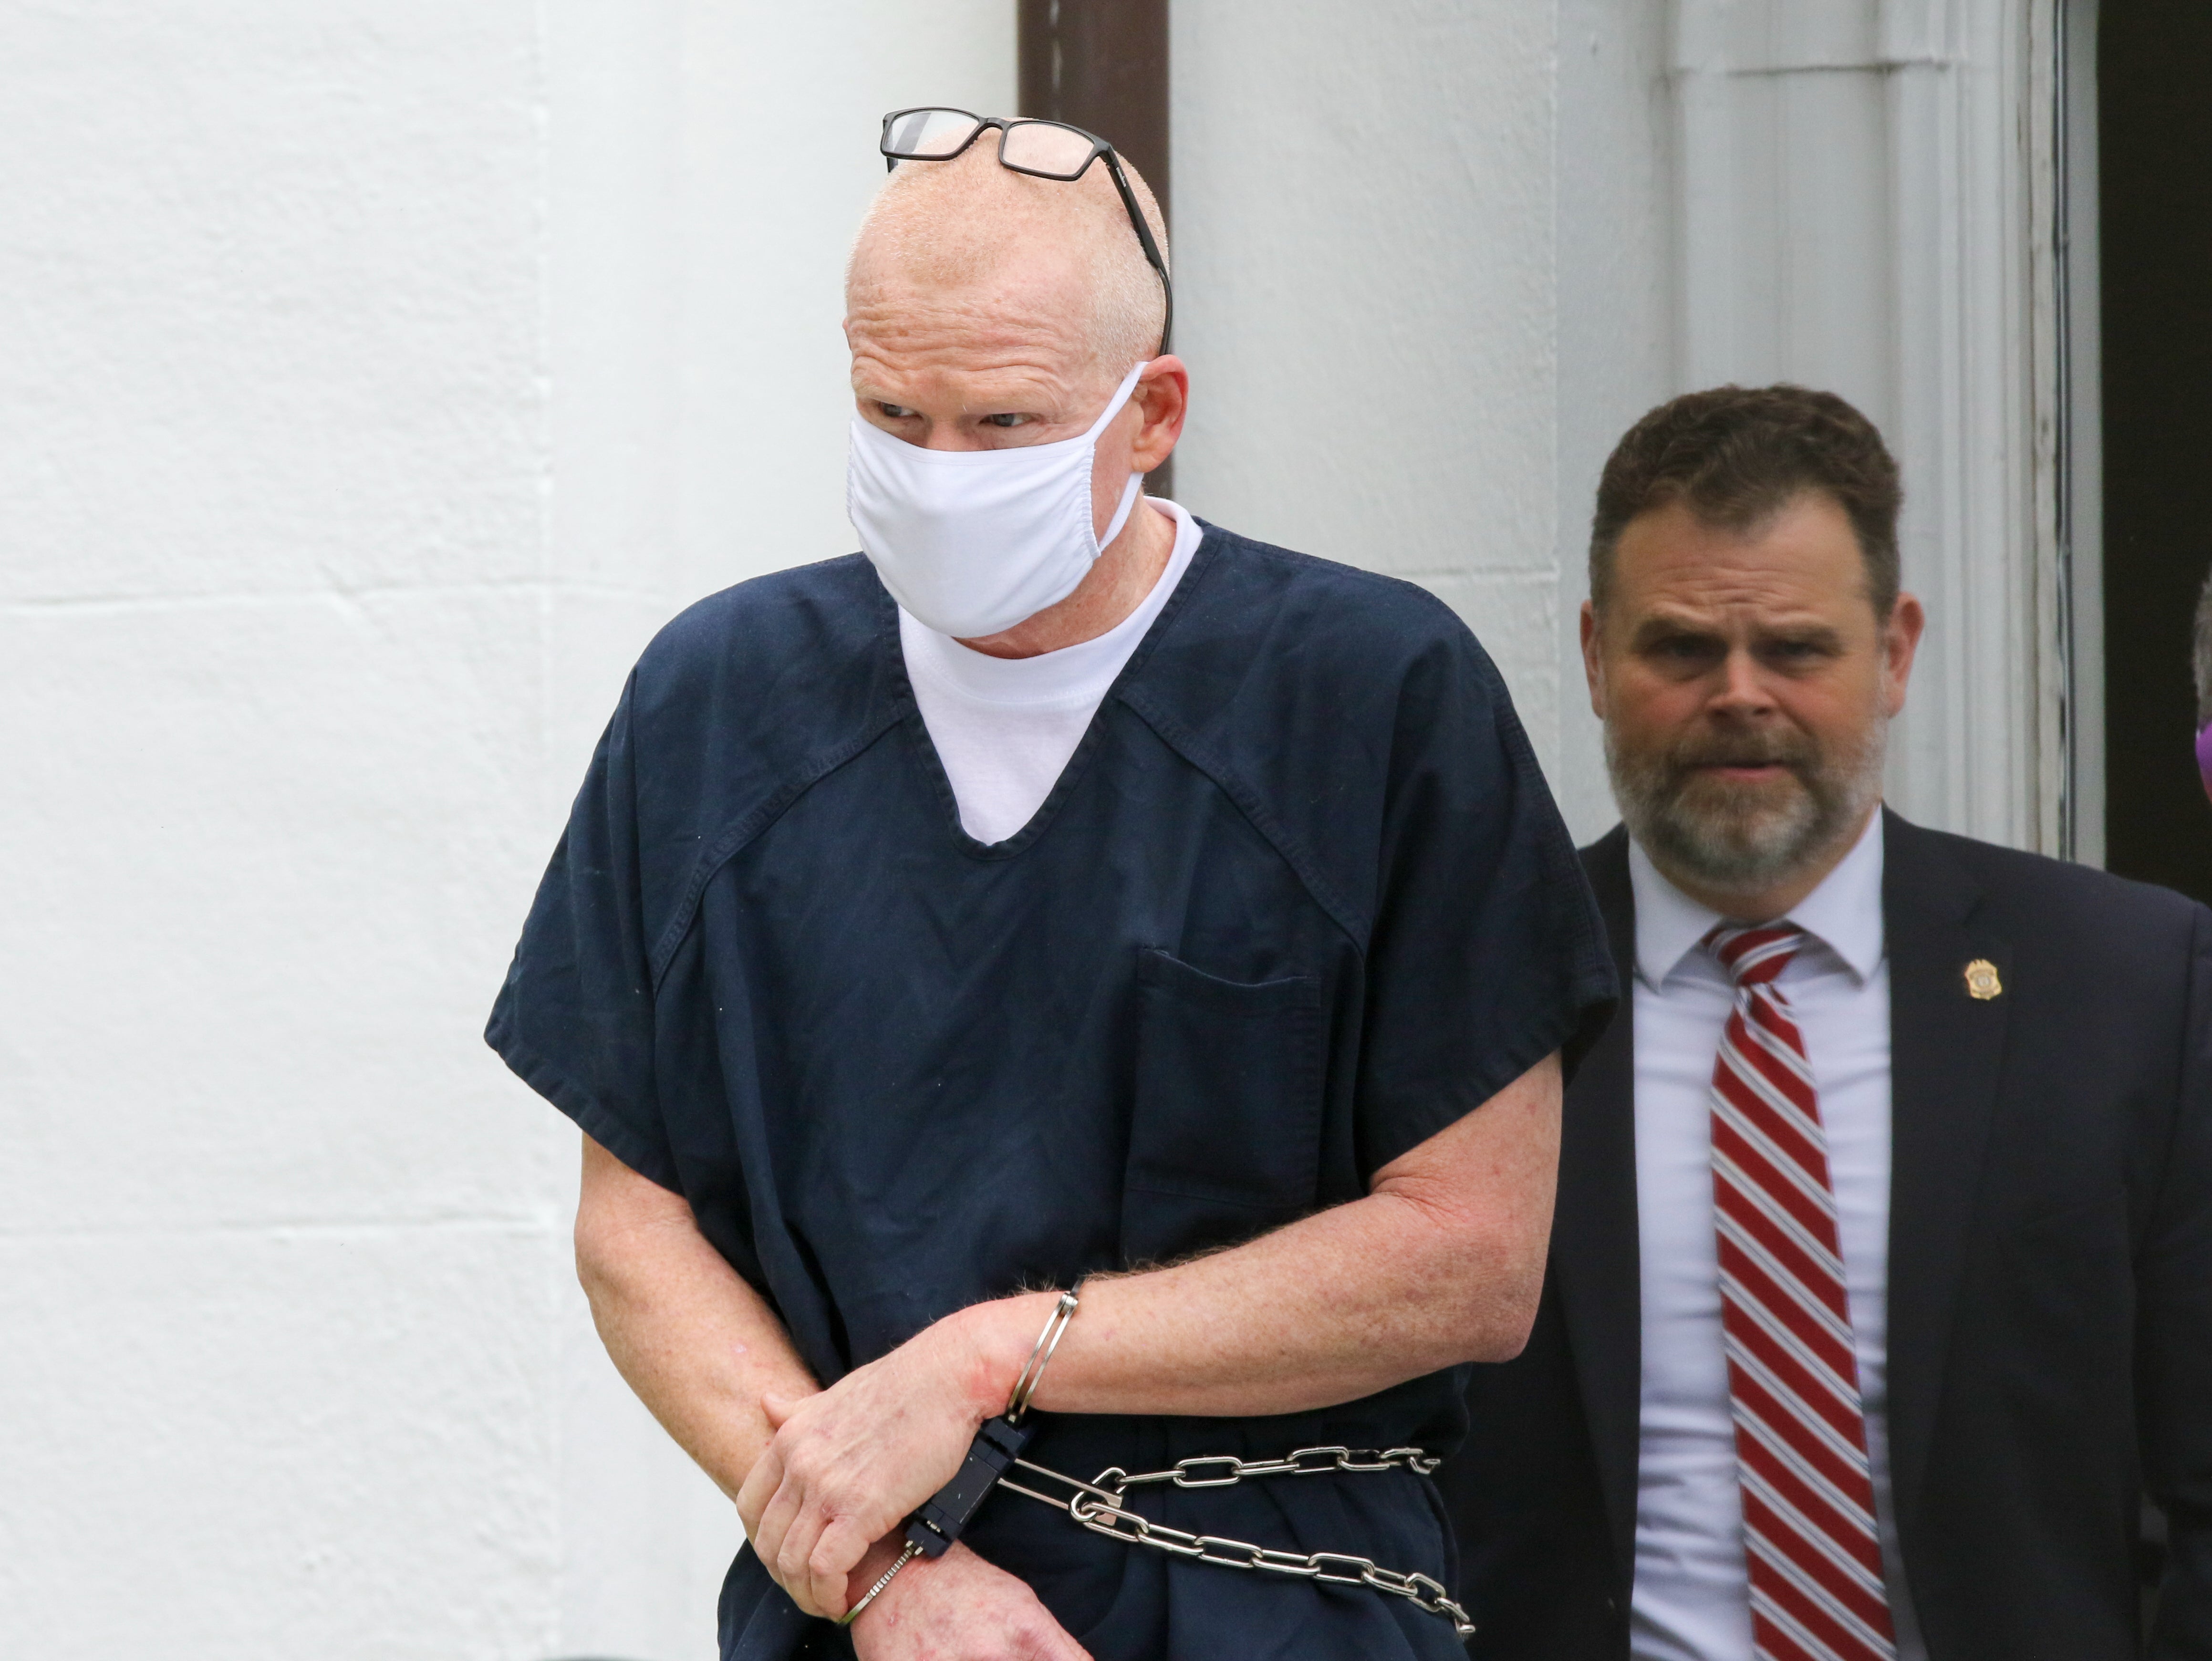 Alex Murdaugh is escorted out of the Colleton County Courthouse in Walterboro, South Carolina, on Wednesday 20 July 2022